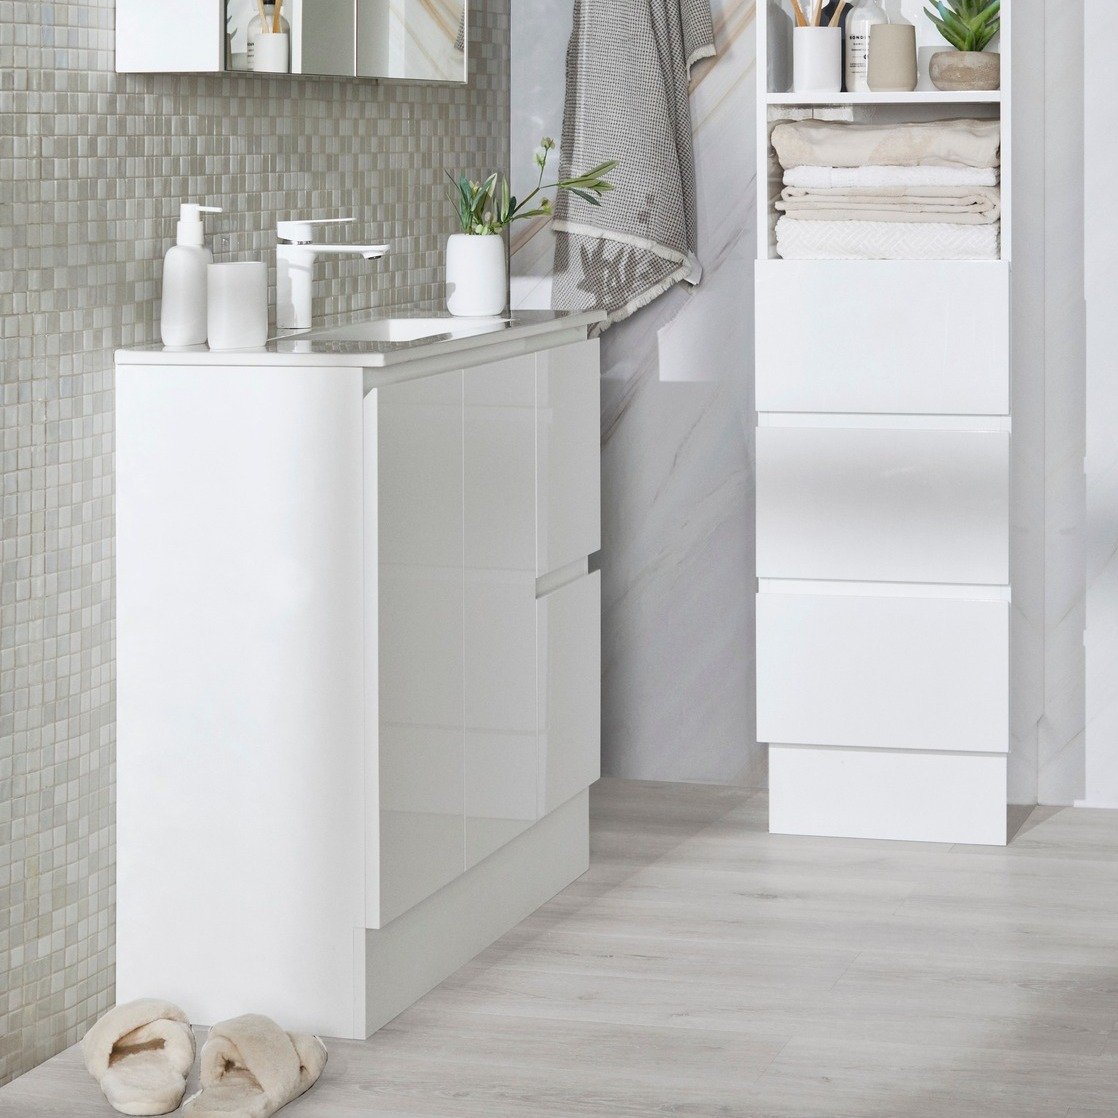 The Narro Vanity is 20% skinnier at 370mm deep and designed for compact bathrooms! Available only at @bunnings ⭐️

#compactbathroom #smallbathroom #bathroomreno